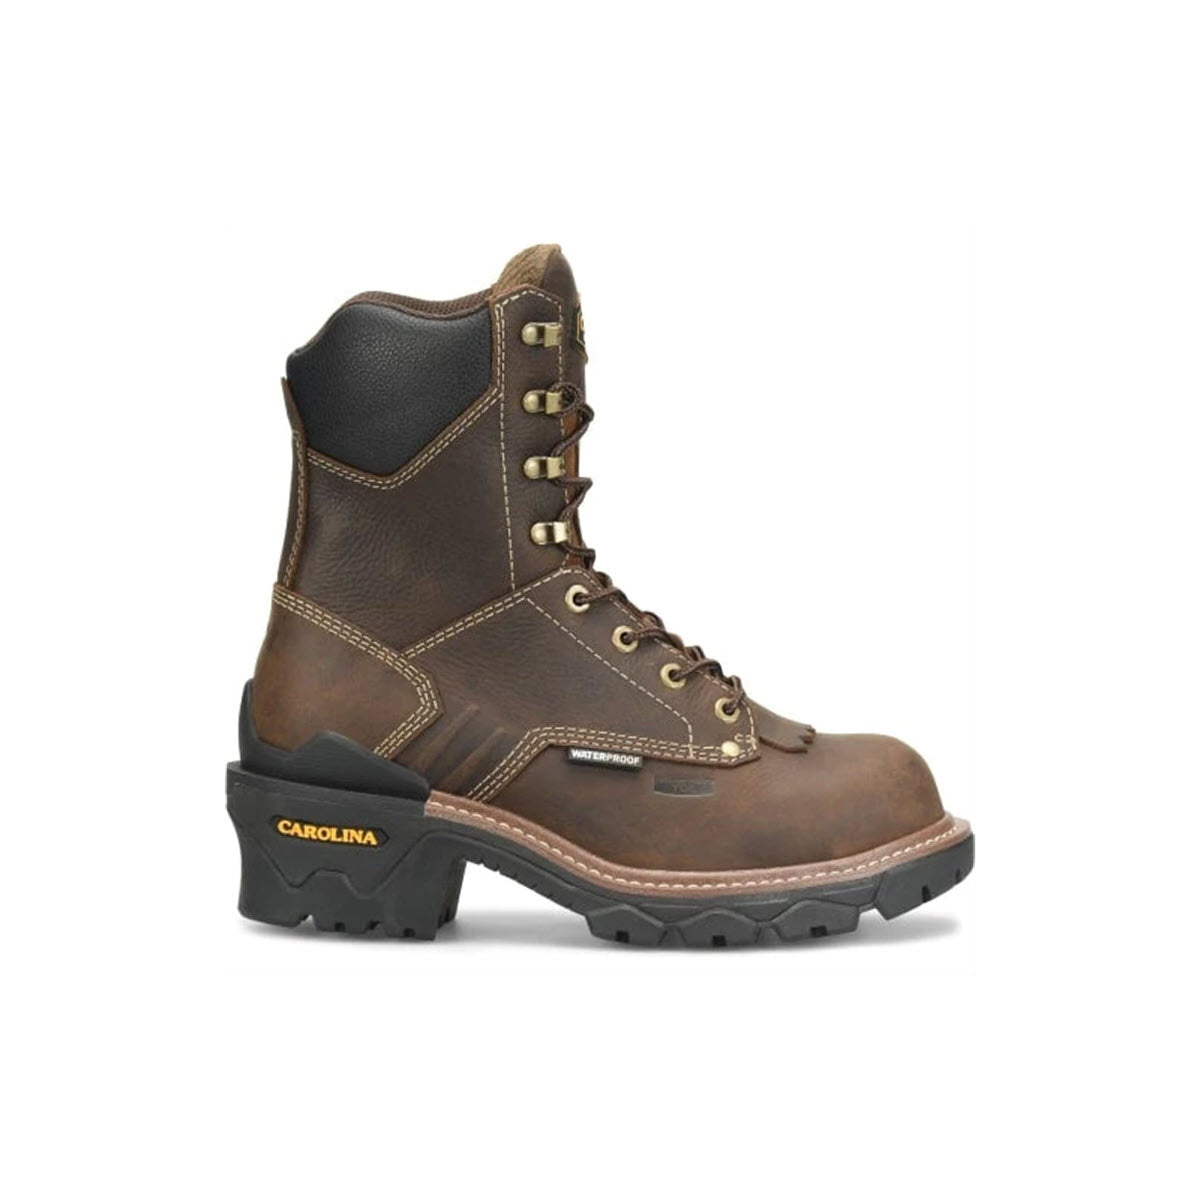 A single brown, high-top, lace-up work boot with a black padded collar, rugged sole, and "Carolina" branding near the heel; this CAROLINA COMP TOE 8 INCH CAPACITY WATERPROOF DARK COFFEE - MENS also features composite lace-to-toe construction.